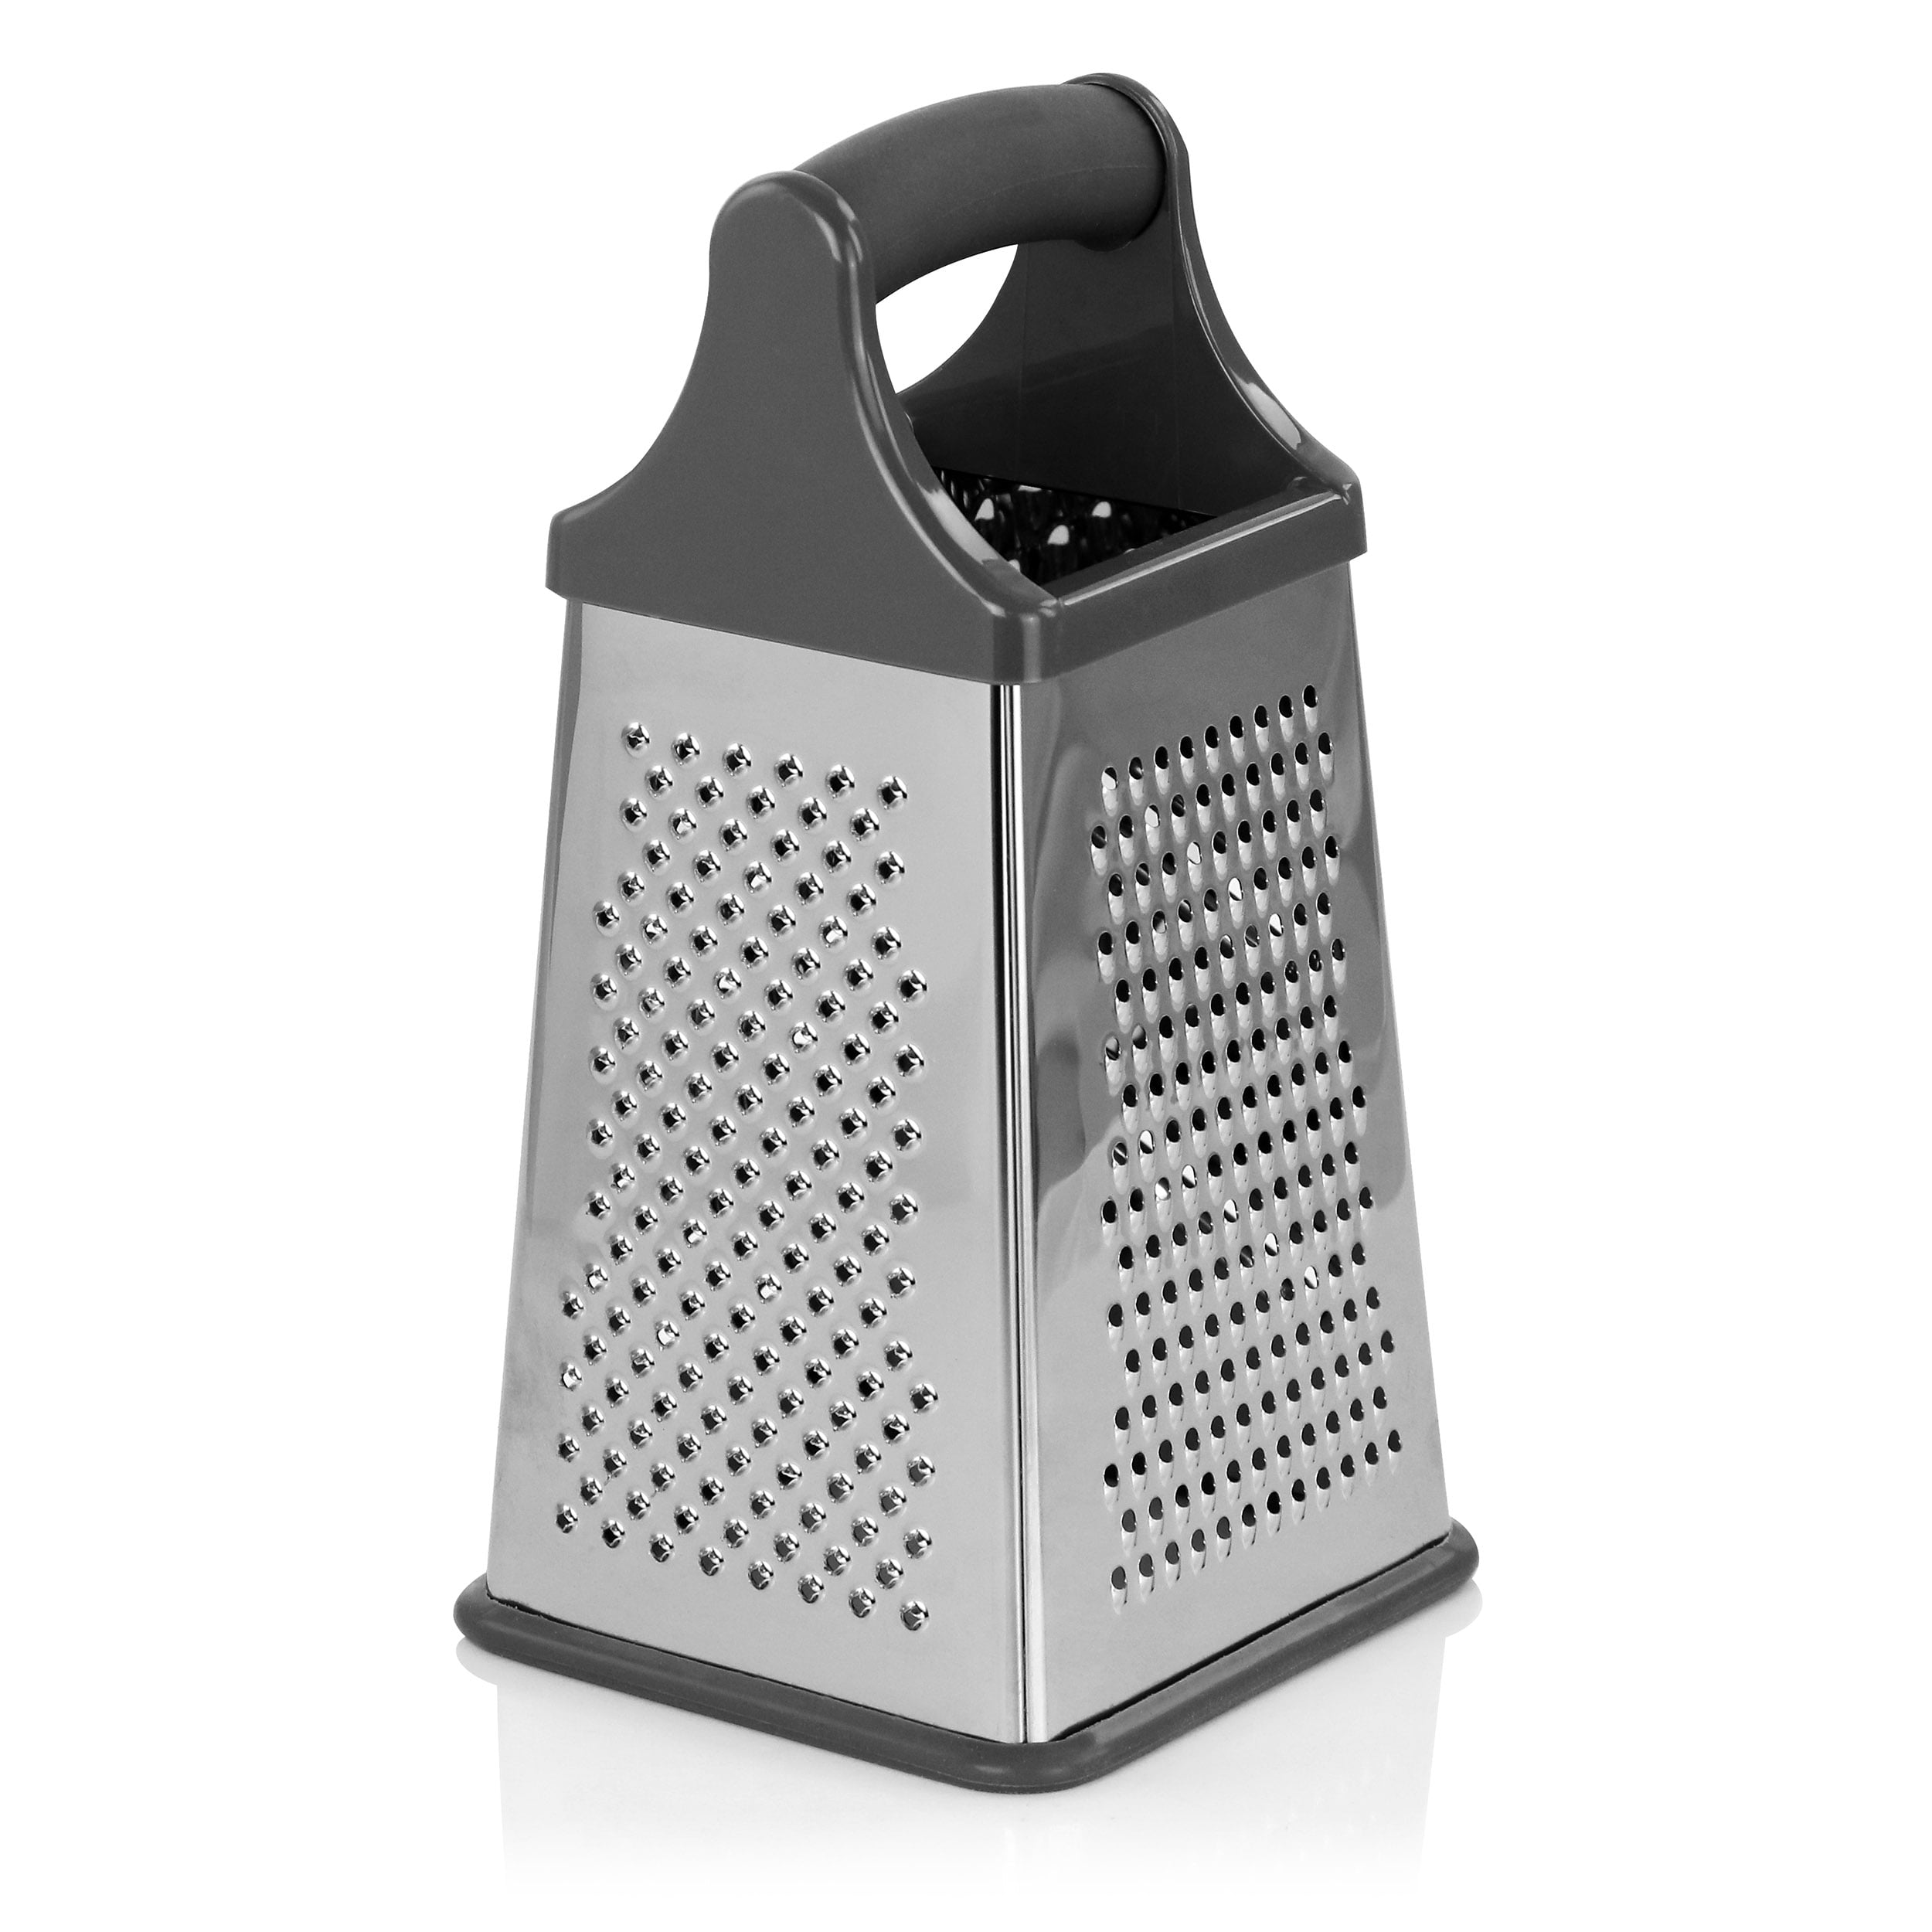 Stainless Steel Box Grater - Four Sided Heavy Duty - Silver - 1 Count Box